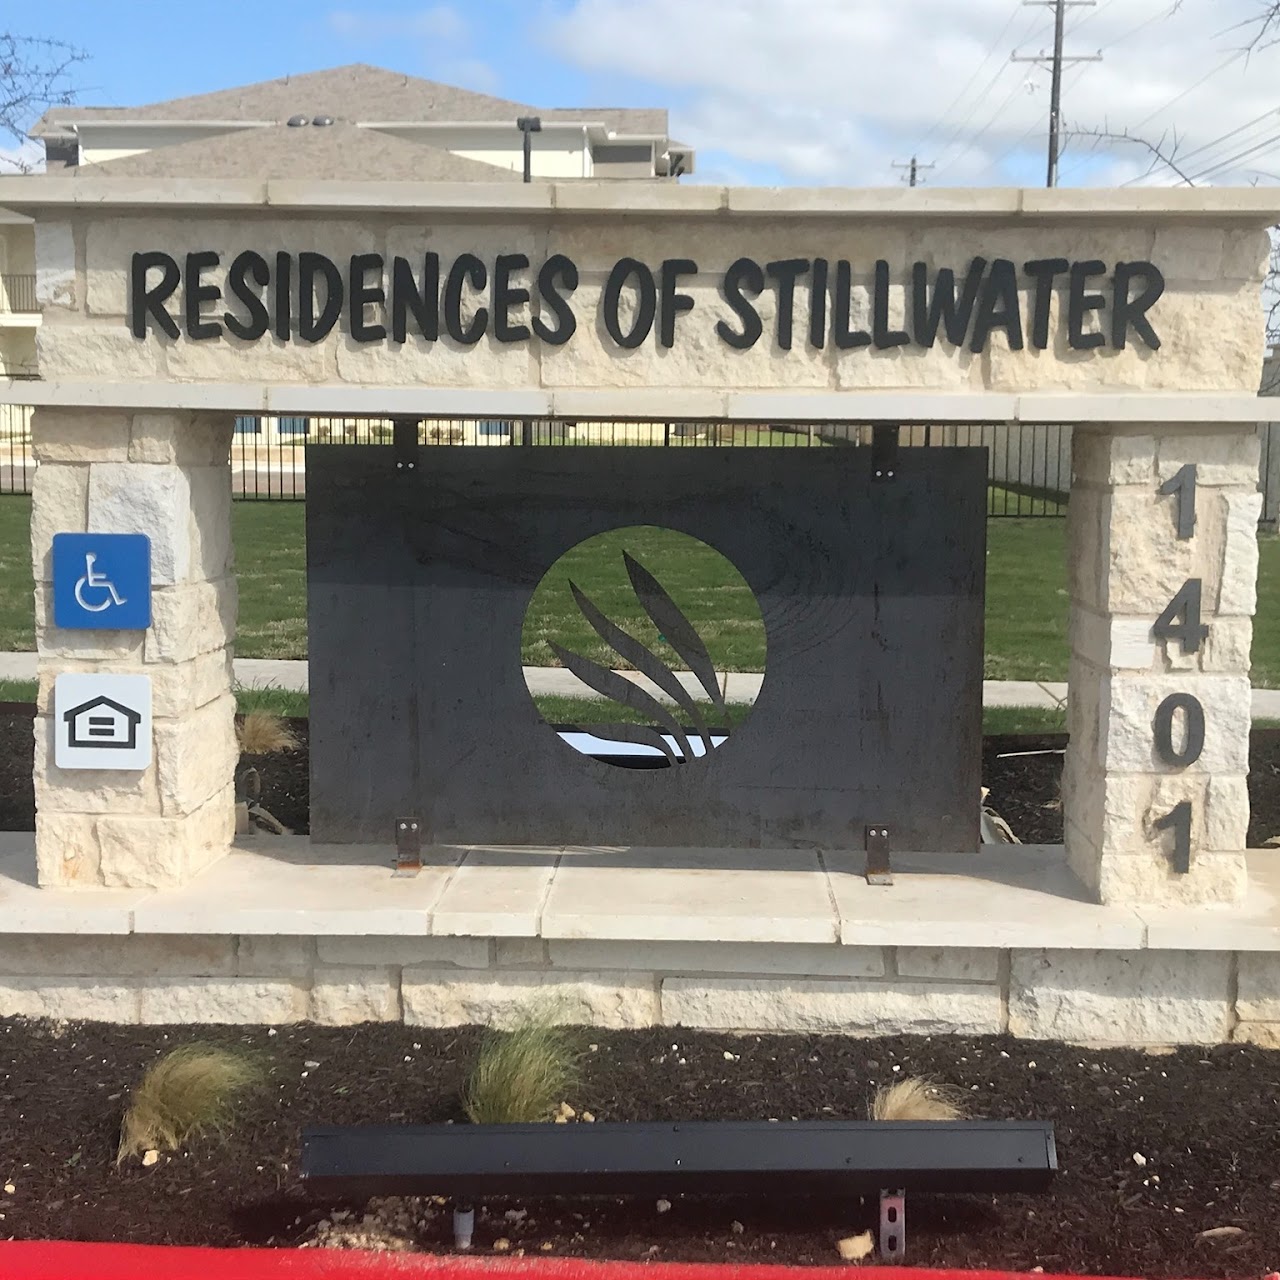 Photo of RESIDENCES OF STILLWATER. Affordable housing located at 1401 NE INNER LOOP GEORGETOWN, TX 78626